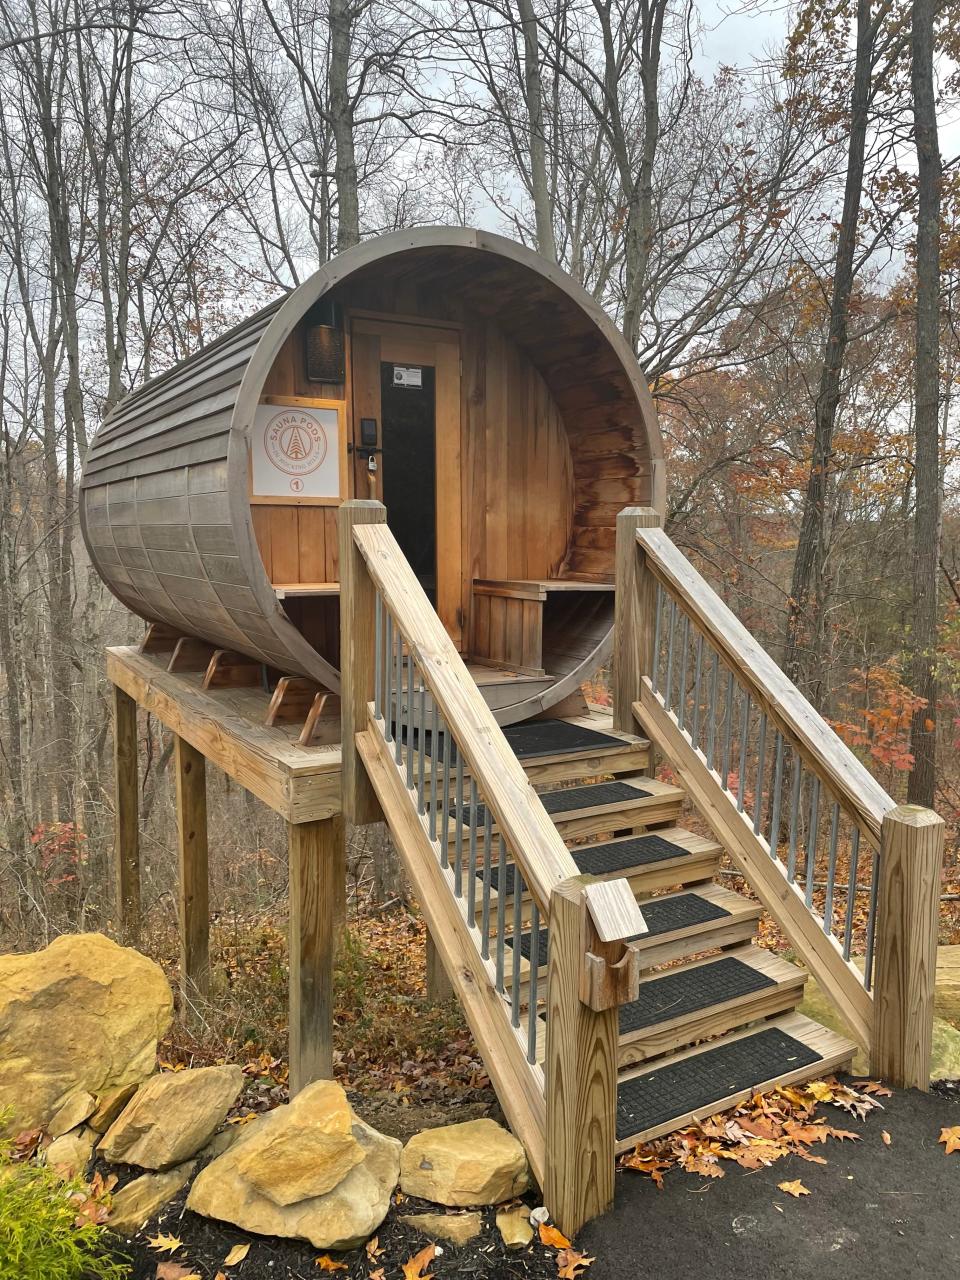 Sauna Pods Hocking Hills offer a cozy and therapeutic experience with a delightful view.